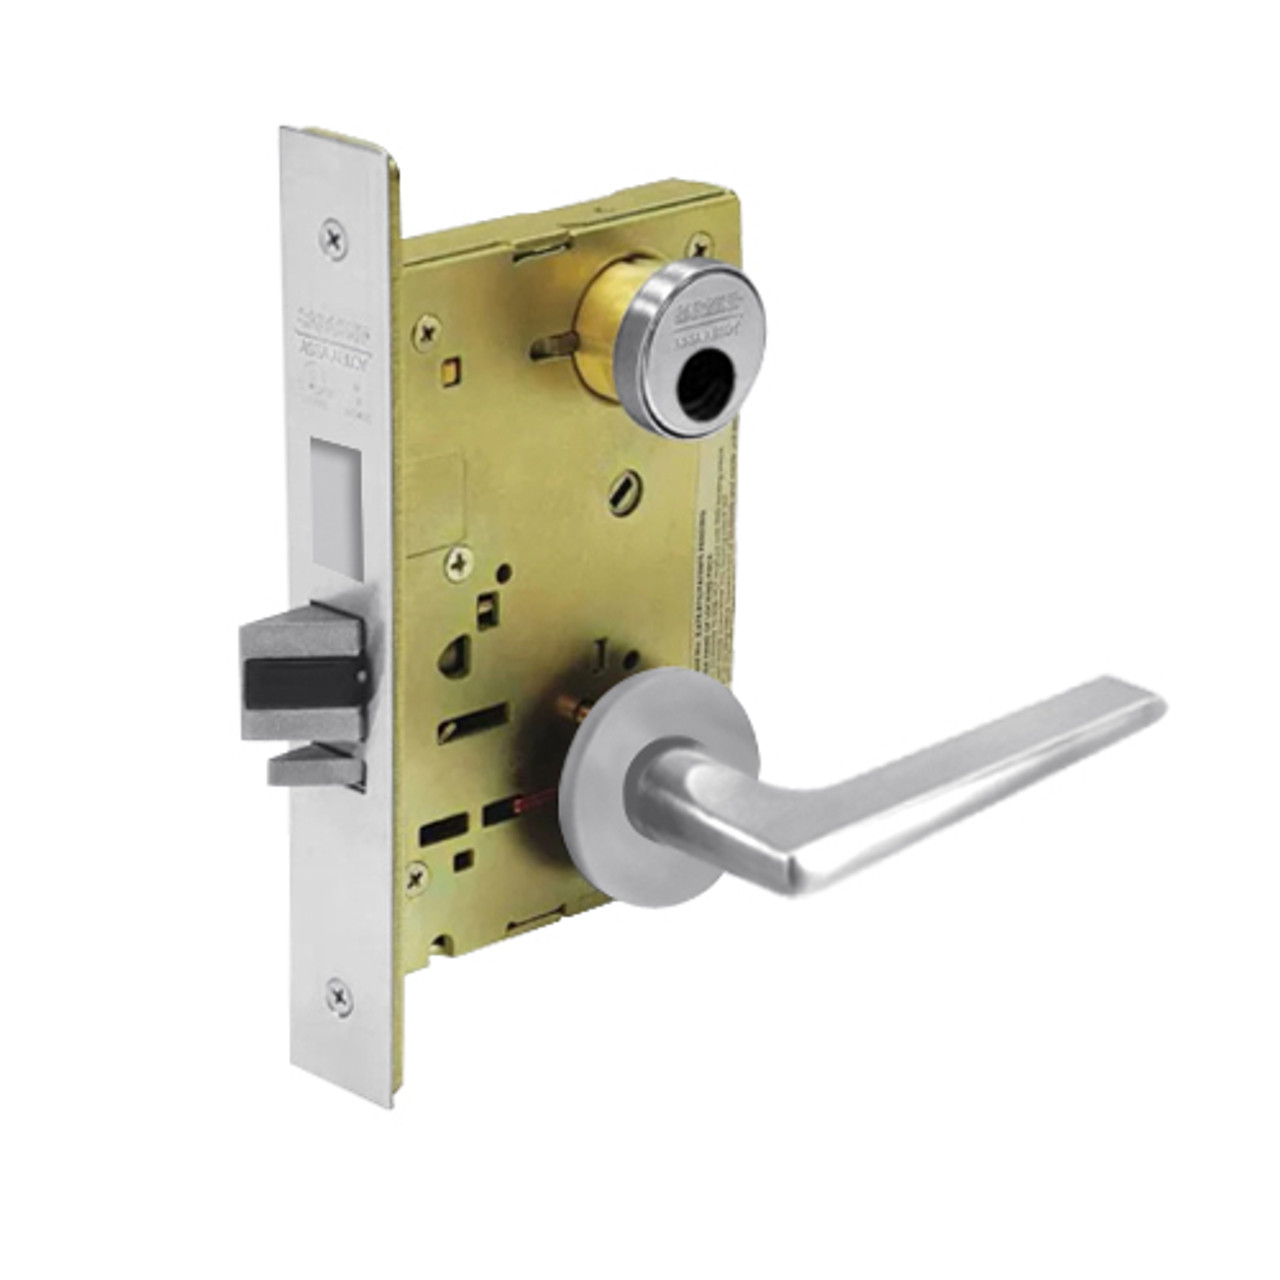 LC-8249-LNF-26 Sargent 8200 Series Security Deadbolt Mortise Lock with LNF Lever Trim and Deadbolt Less Cylinder in Bright Chrome